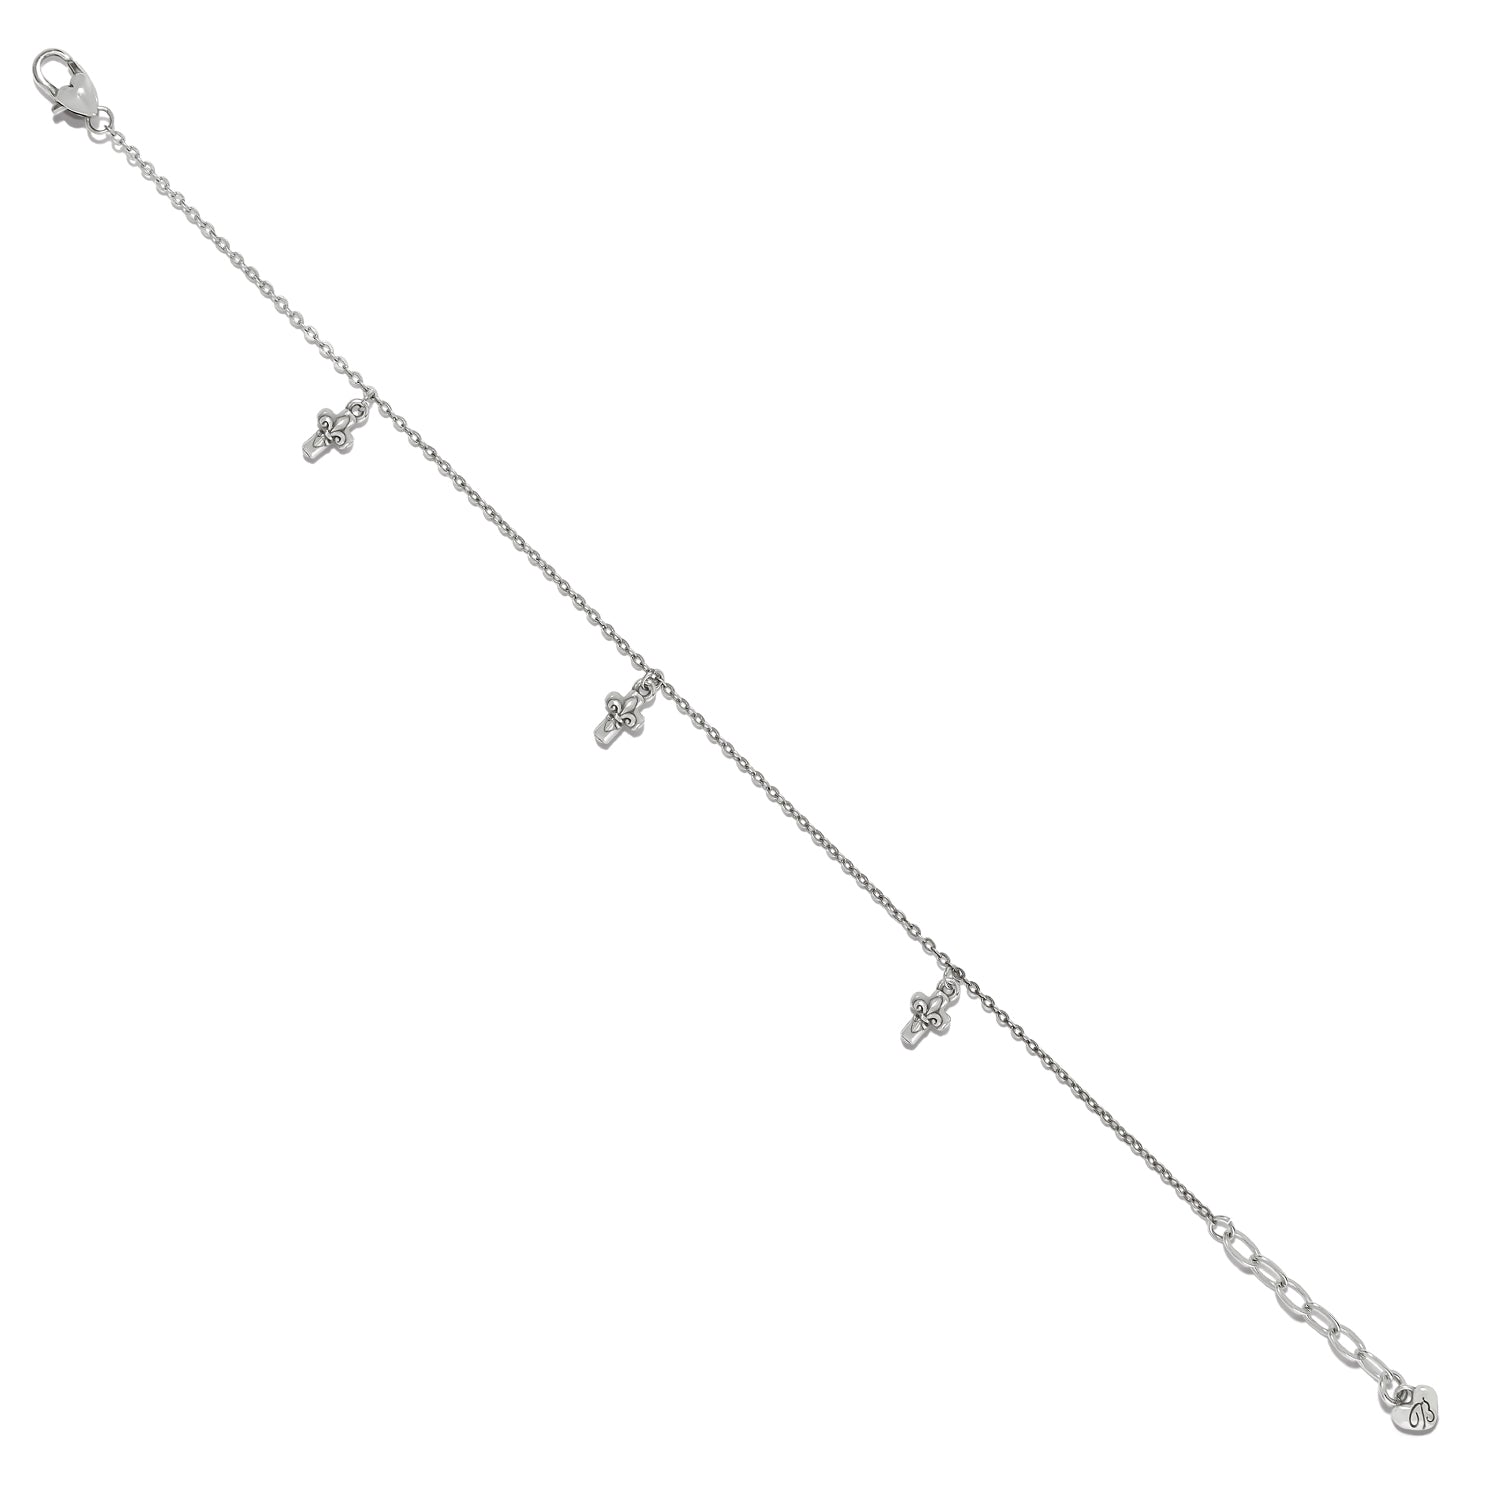 Cross Anklet by Brighton features three delicate cross charms. Silver plated, 9" - 10" Adjustable closure. Shop at The Painted Cottage in Edgewater, MD.